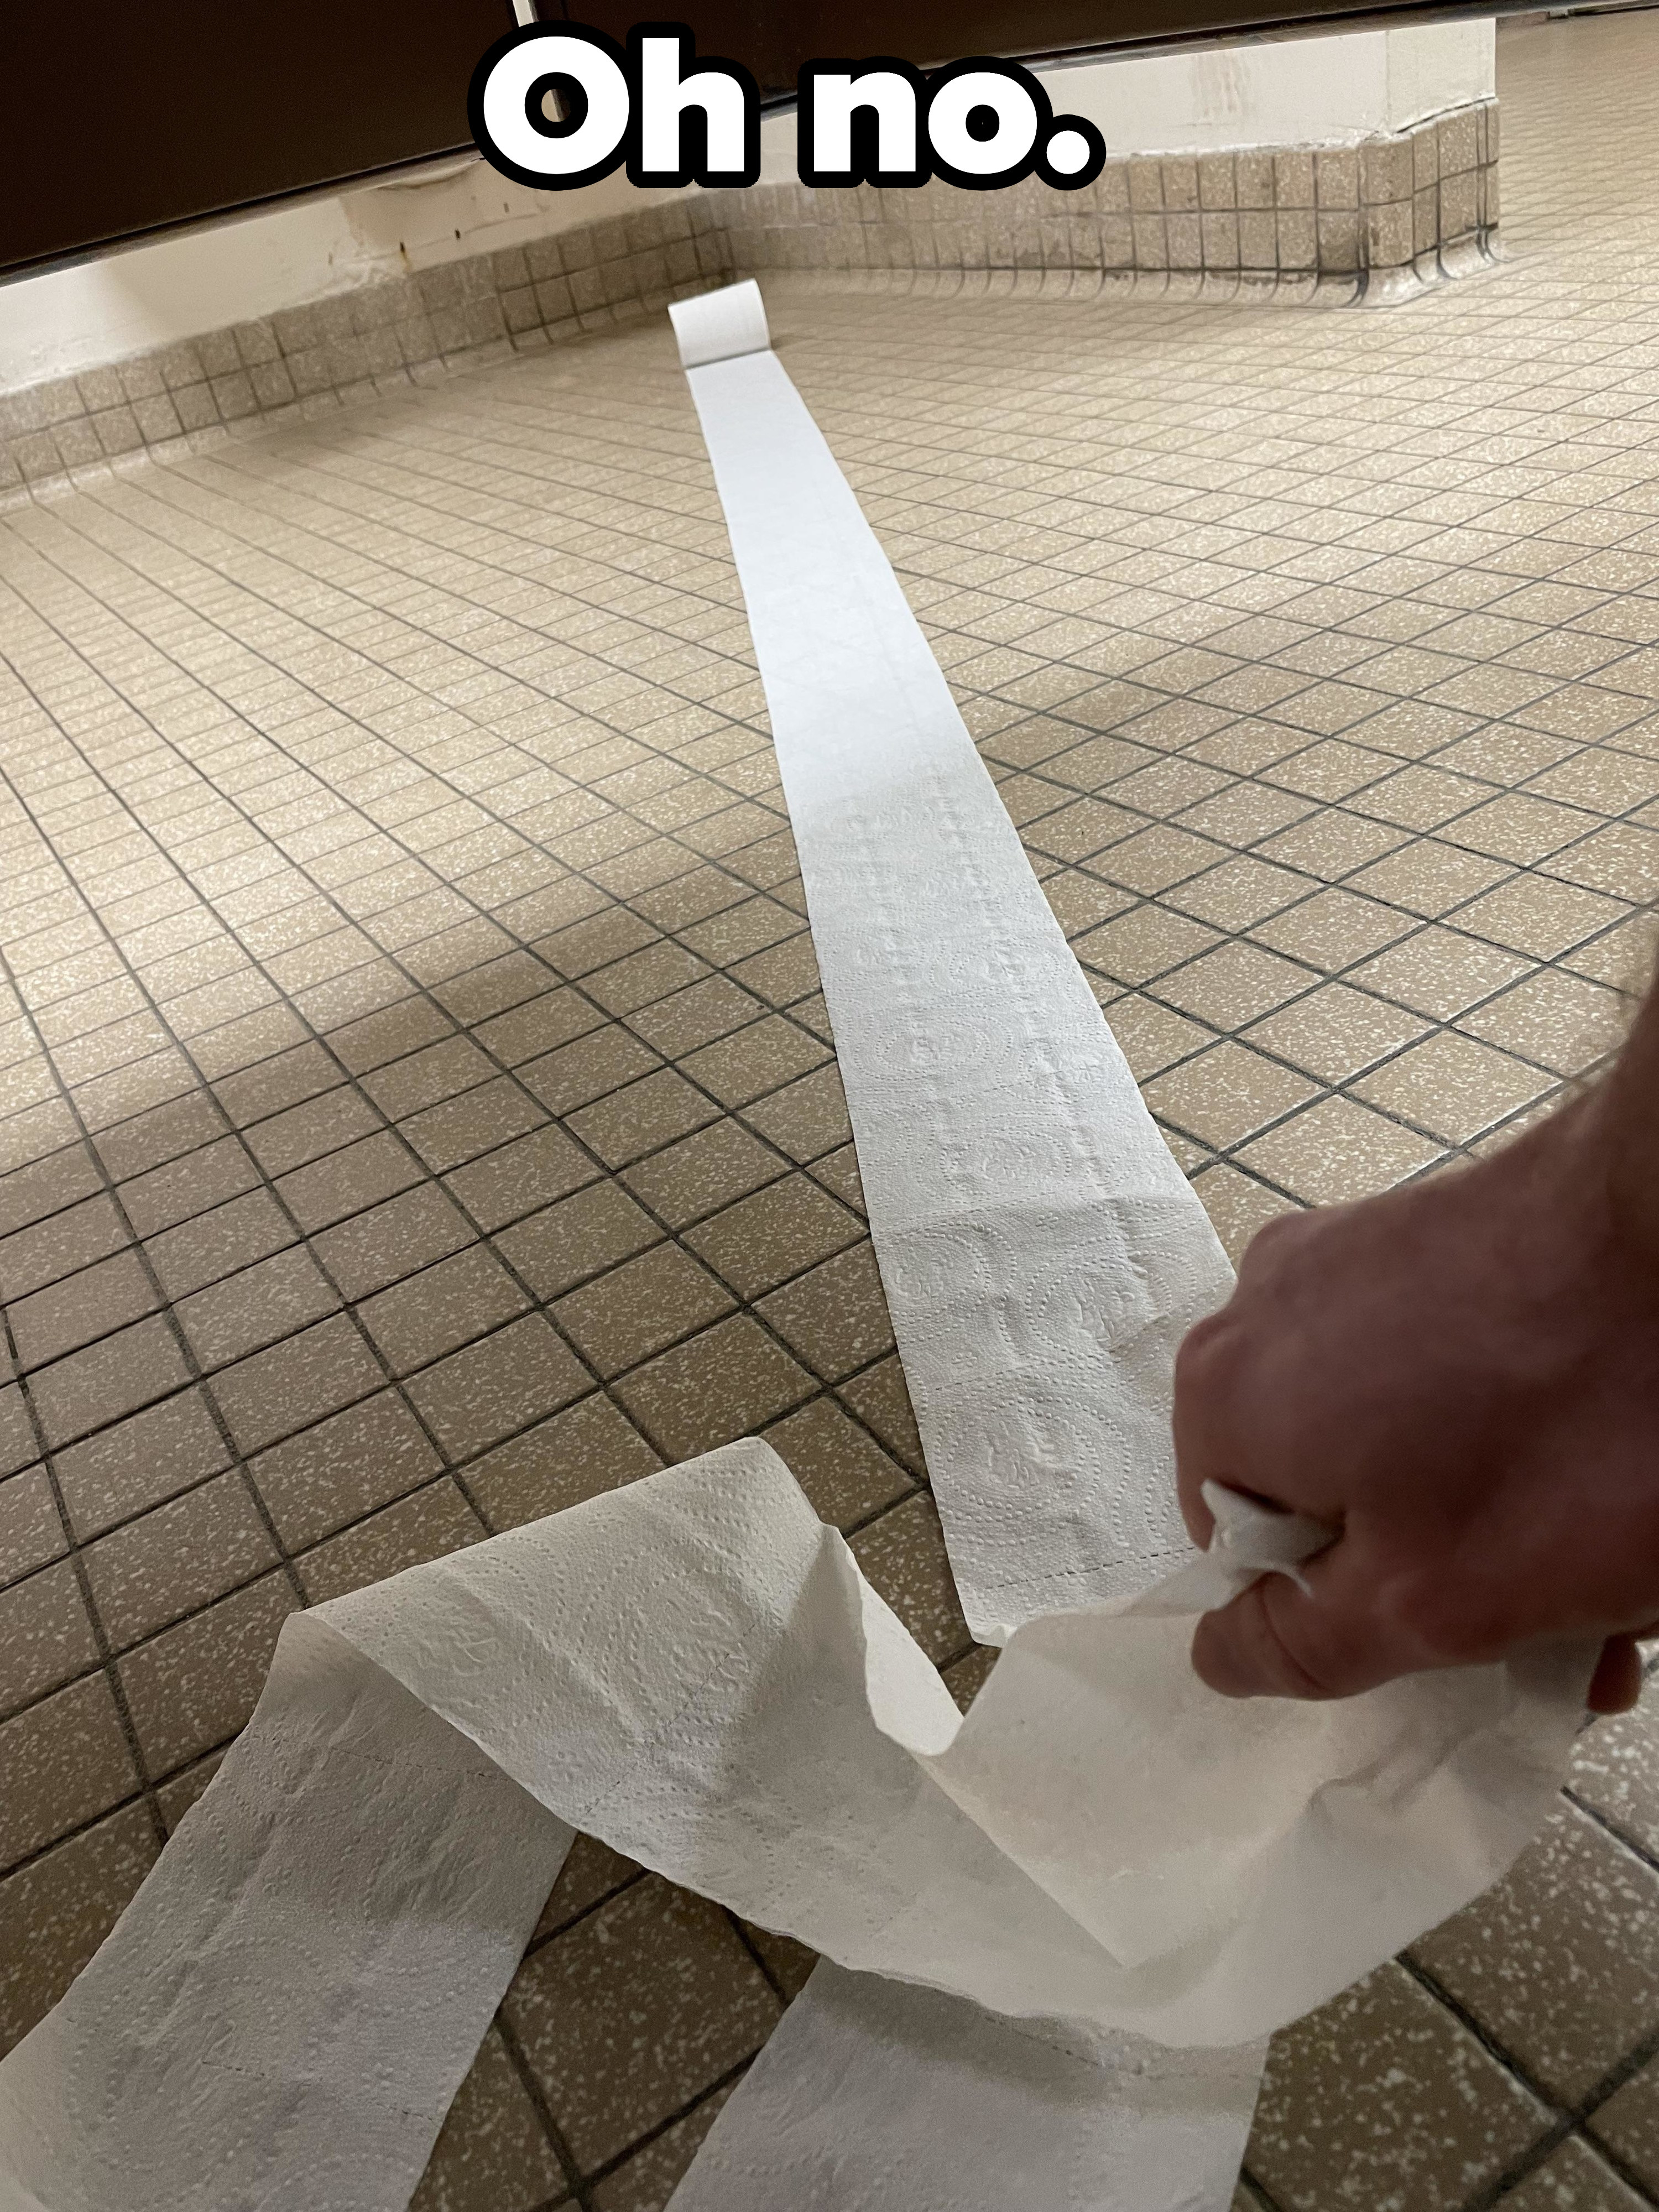 Toilet paper that rolled away from a person